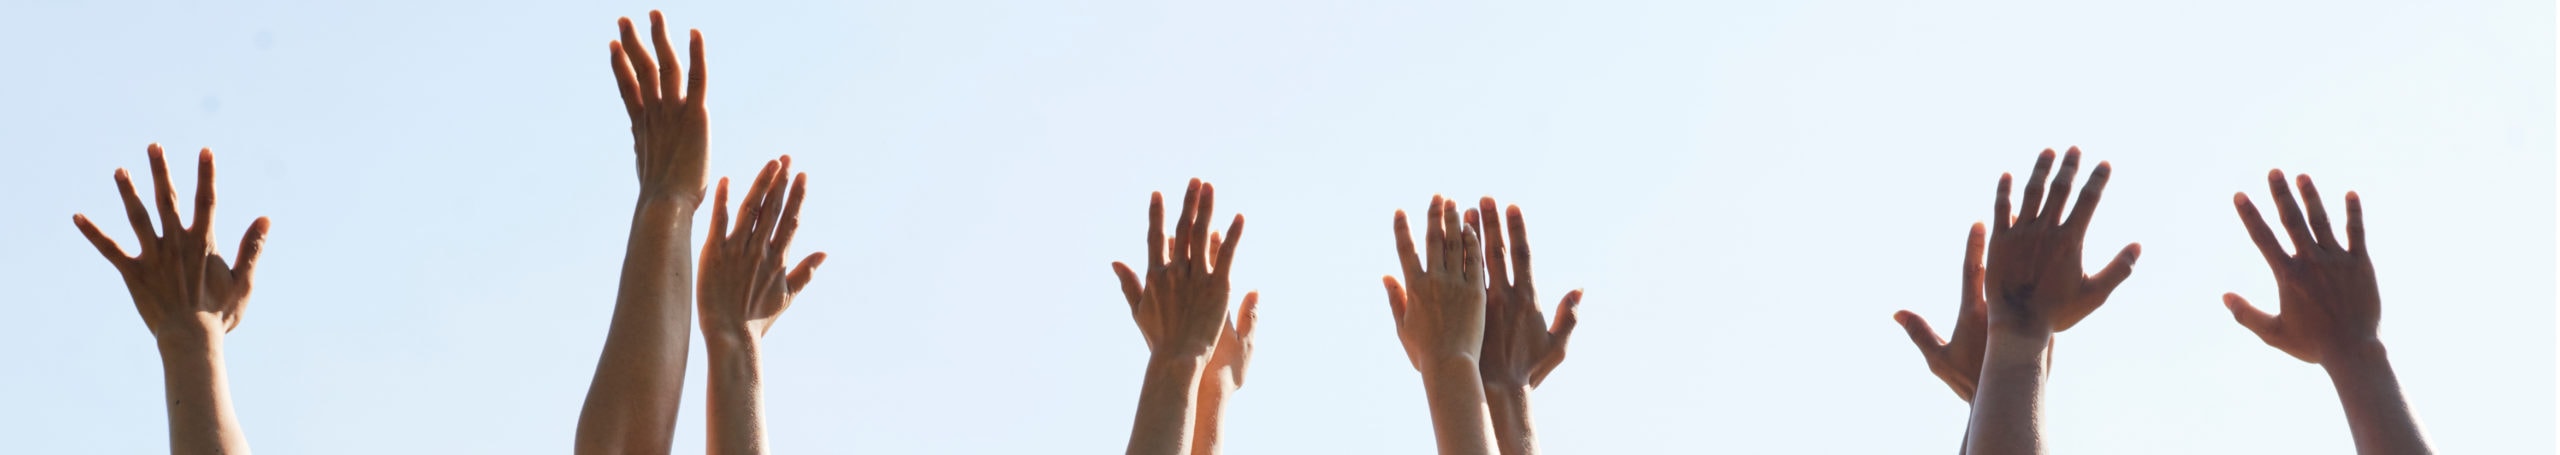 Group Of People With Hands Up In The Air